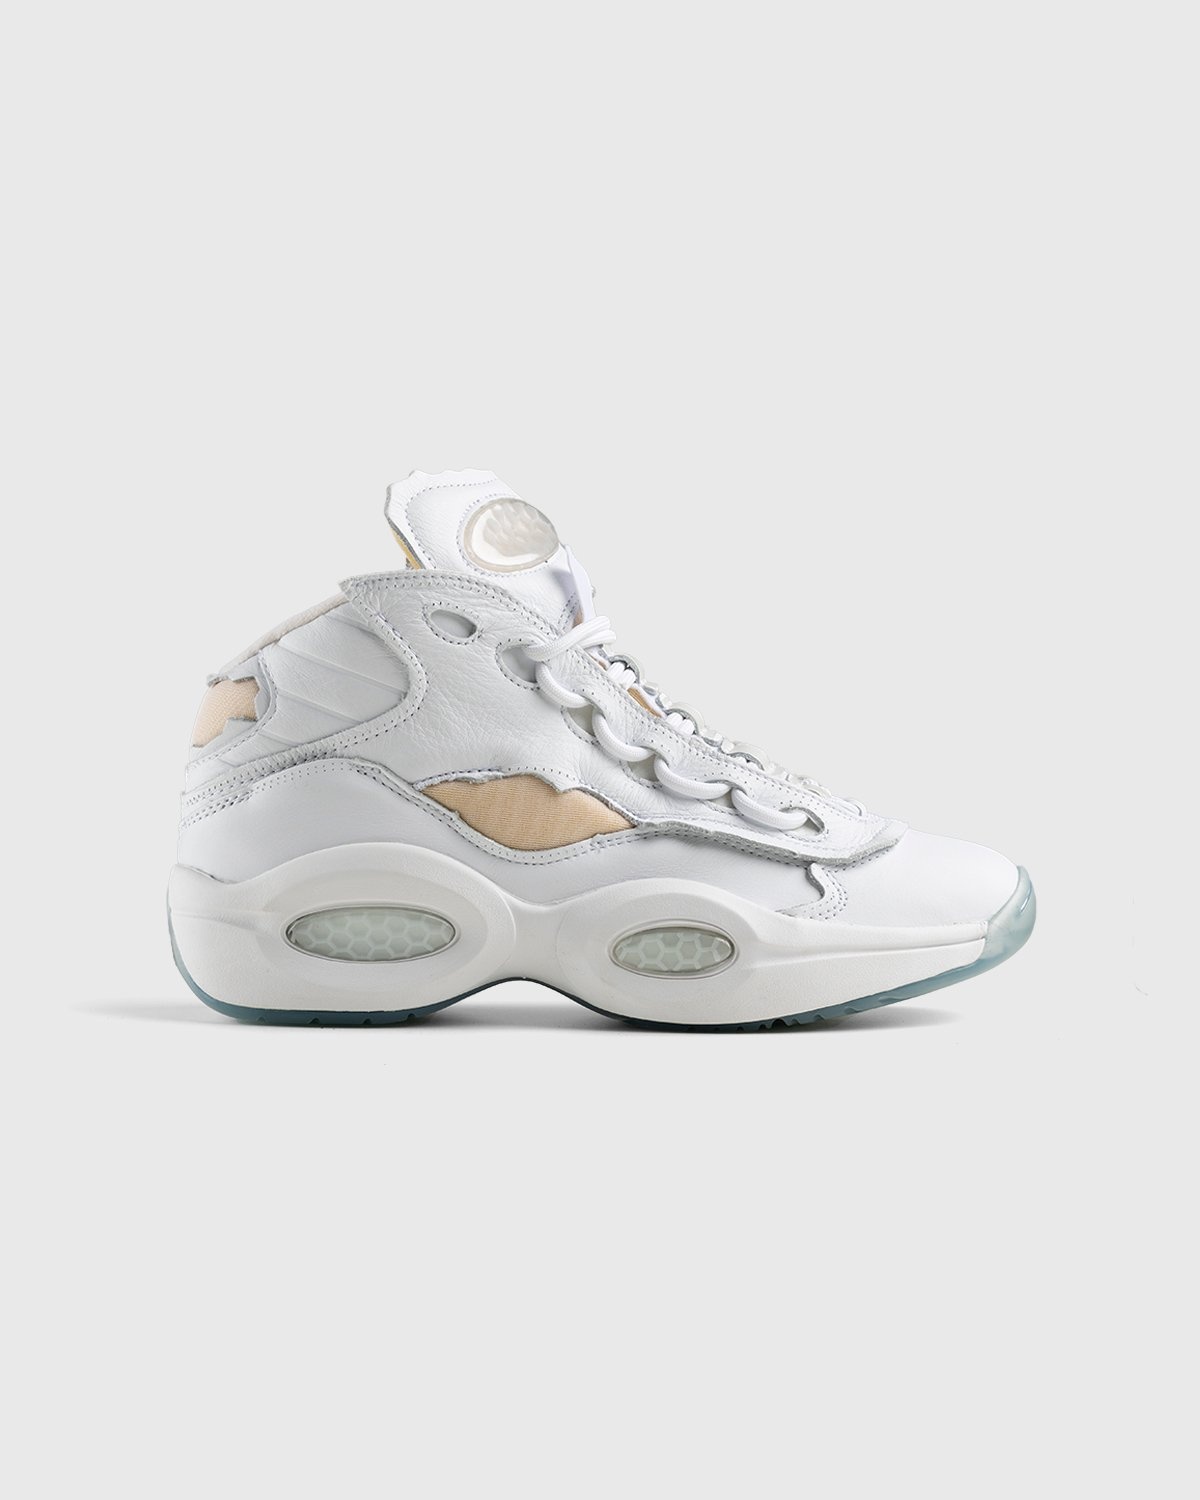 Reebok x Maison Margiela – Question Mid Memory Of White - High Top Sneakers - White - Image 1